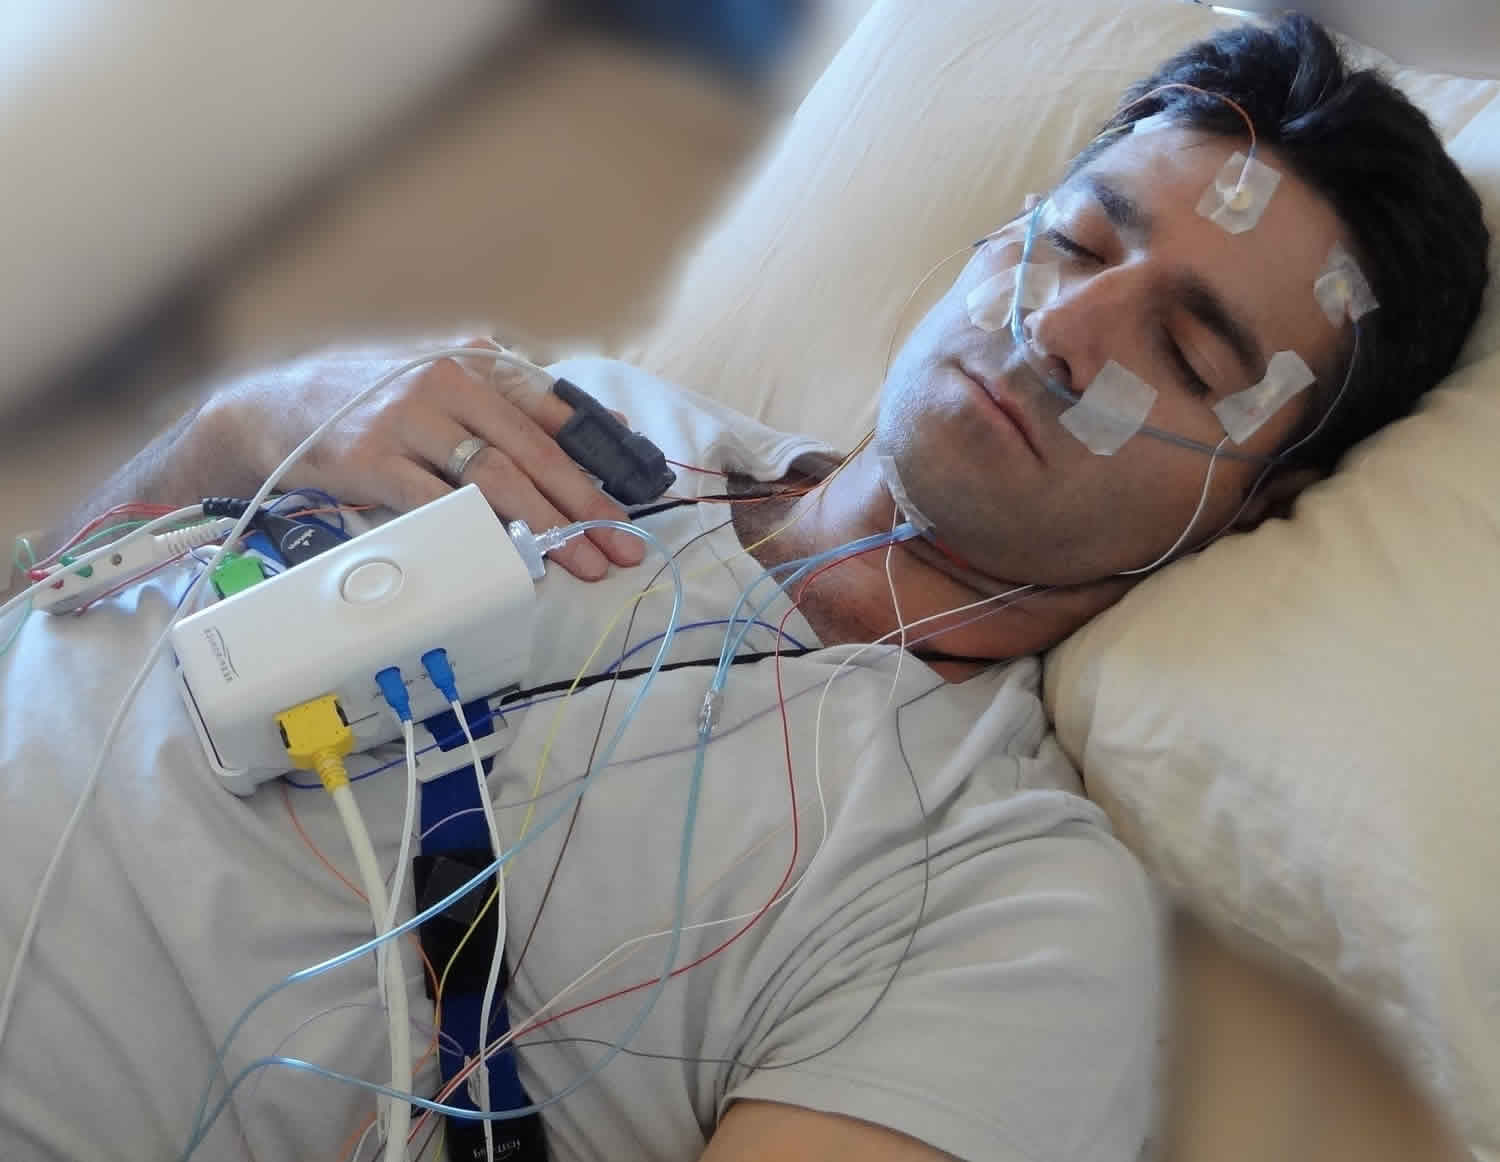 Appearance of the patient during the polysomnography study